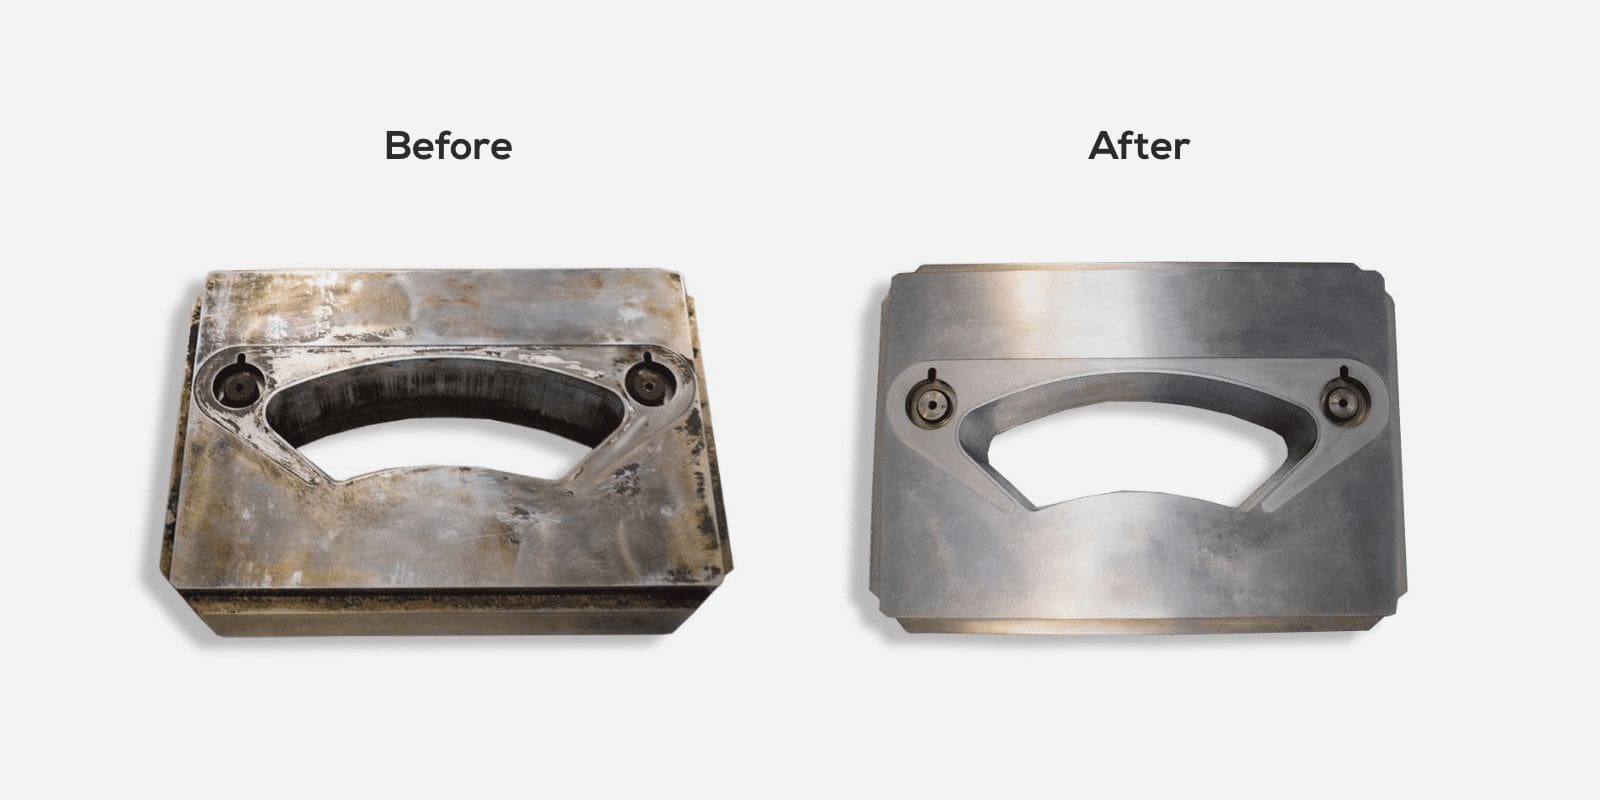 Before and after ultrasonic cleaning